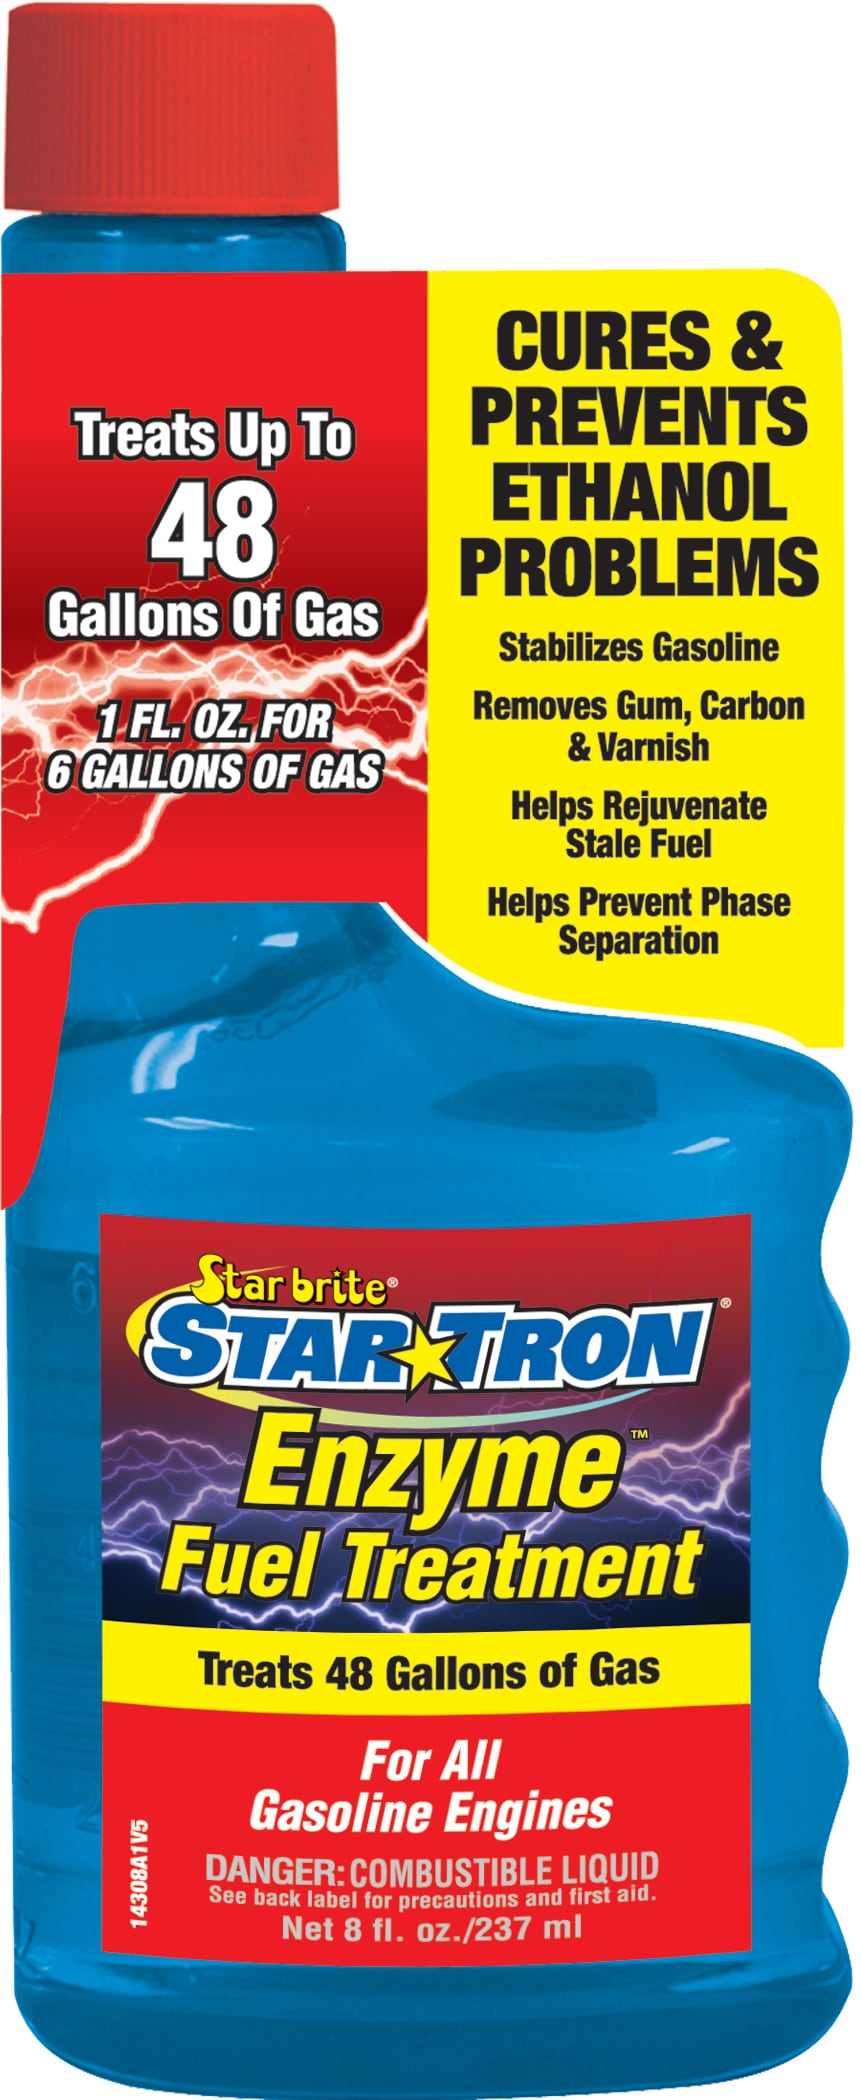 STAR TRON 8 oz. 2-cycle or 4-cycle Engines Fuel Additive in the